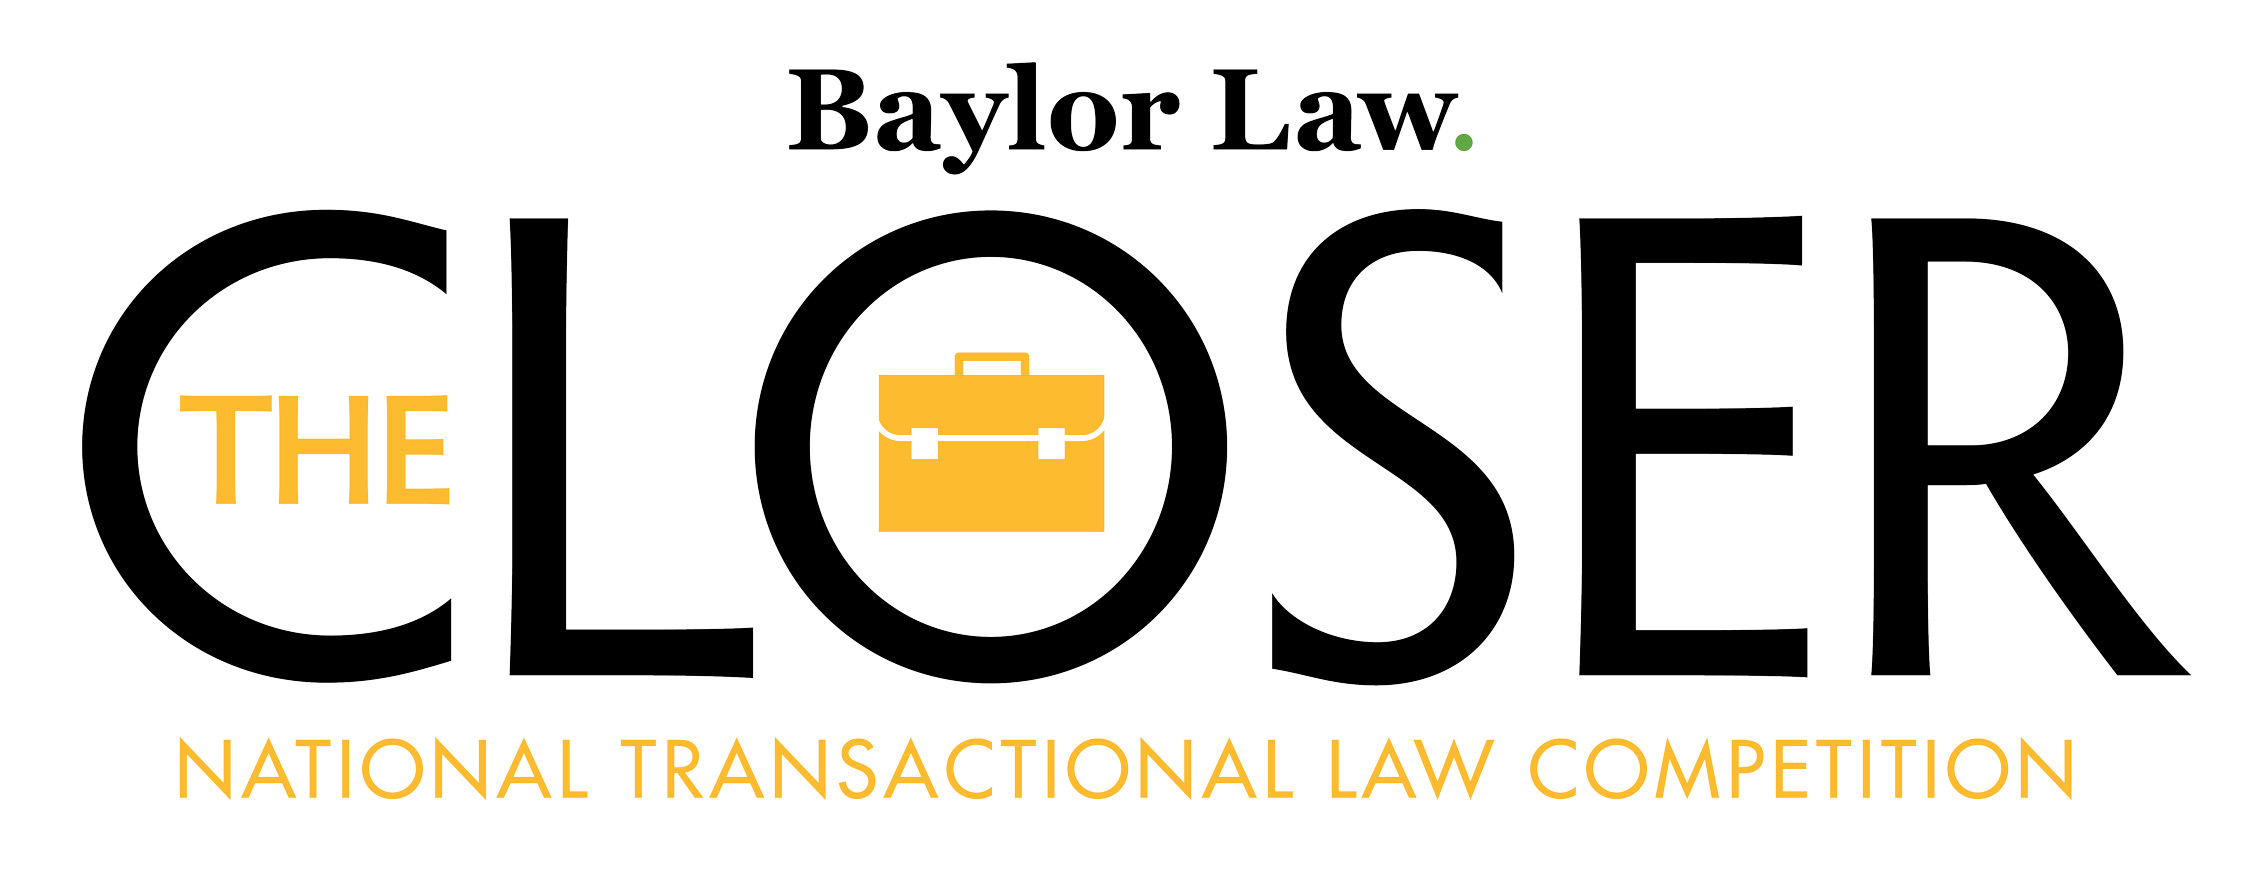 Banner announcing Baylor Law's The Closer National Transactional Law Competition